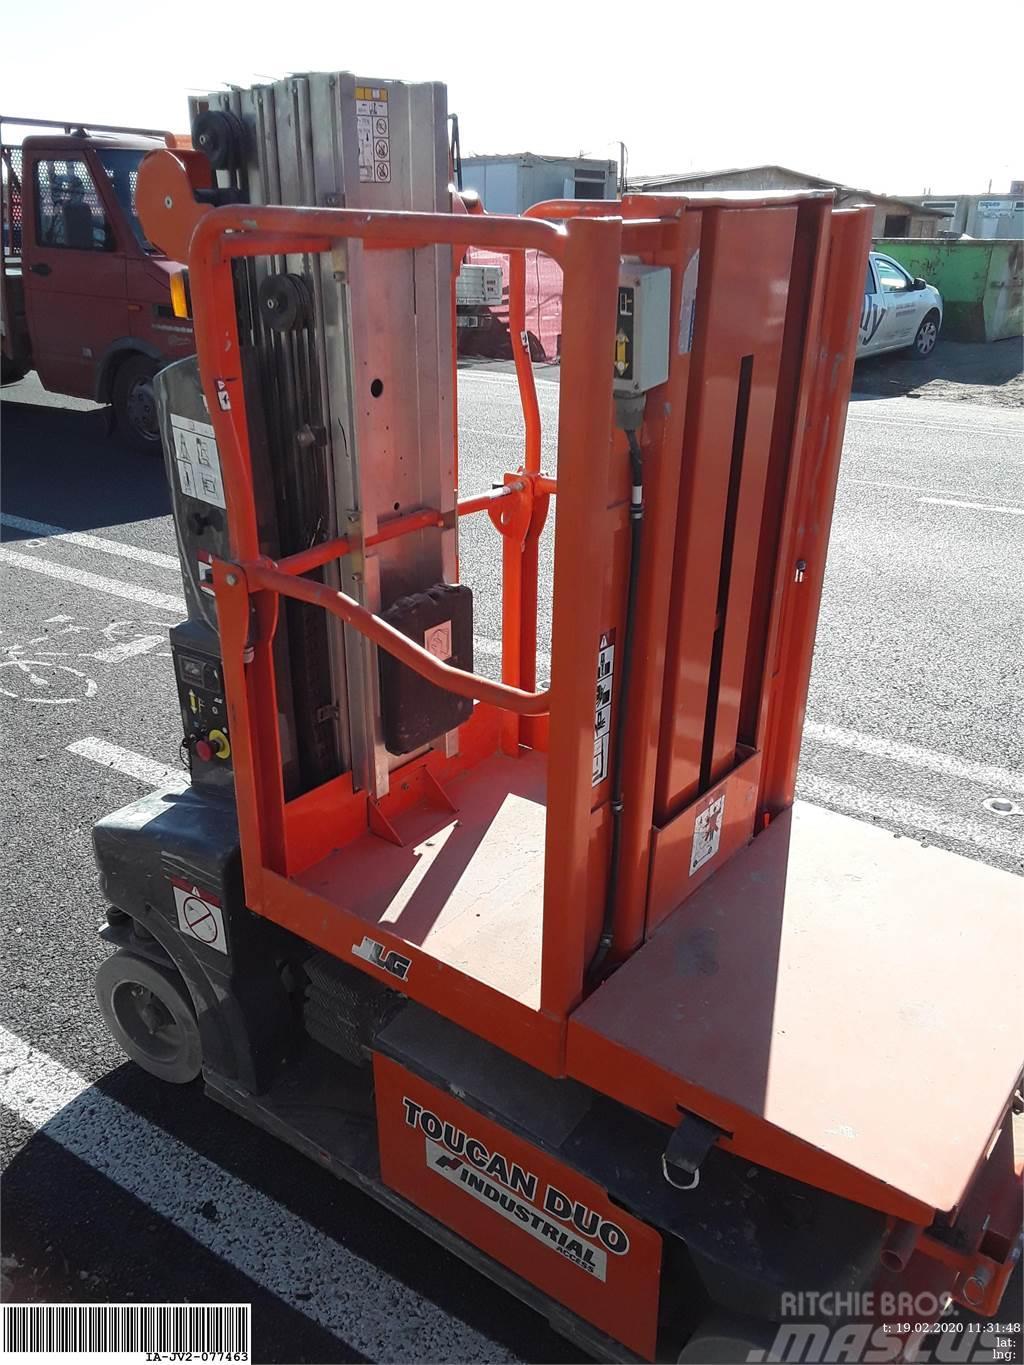 JLG Toucan duo Other